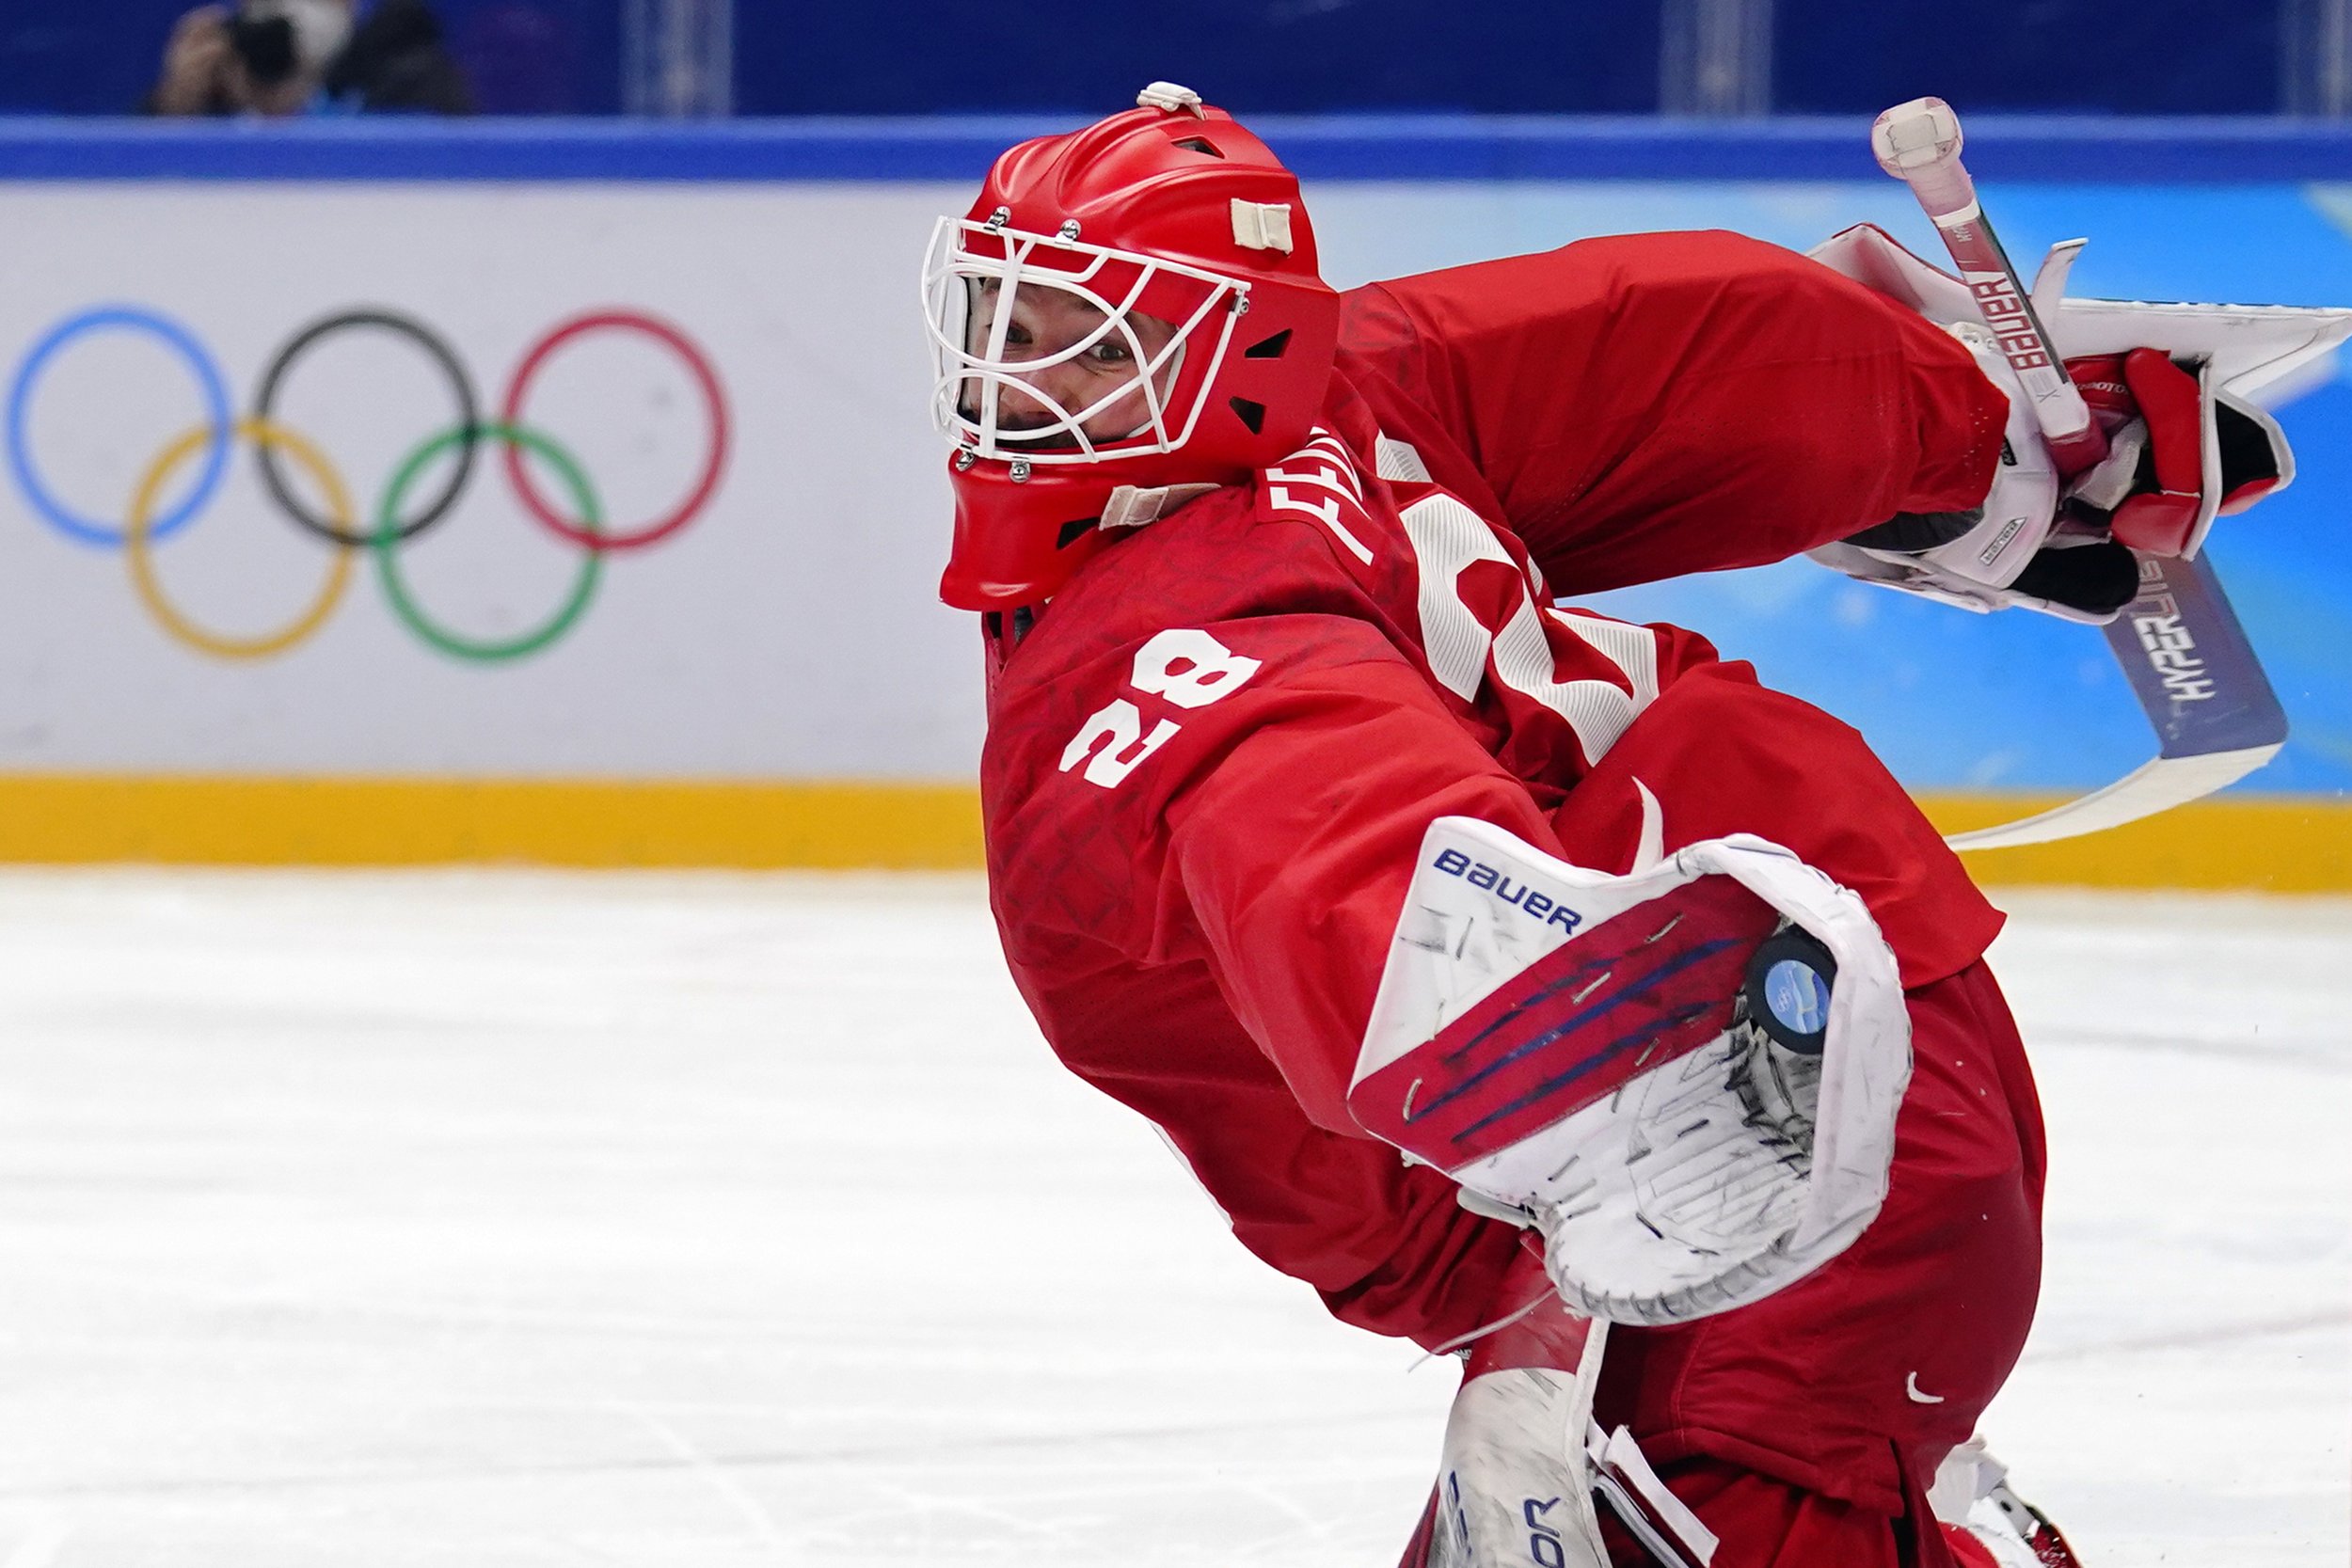  Russian Olympic Committee goalkeeper Ivan Fedotov gloves a shot against Czech Republic during a preliminary round men's hockey game at the 2022 Winter Olympics, Saturday, Feb. 12, 2022, in Beijing. (AP Photo/Matt Slocum) 